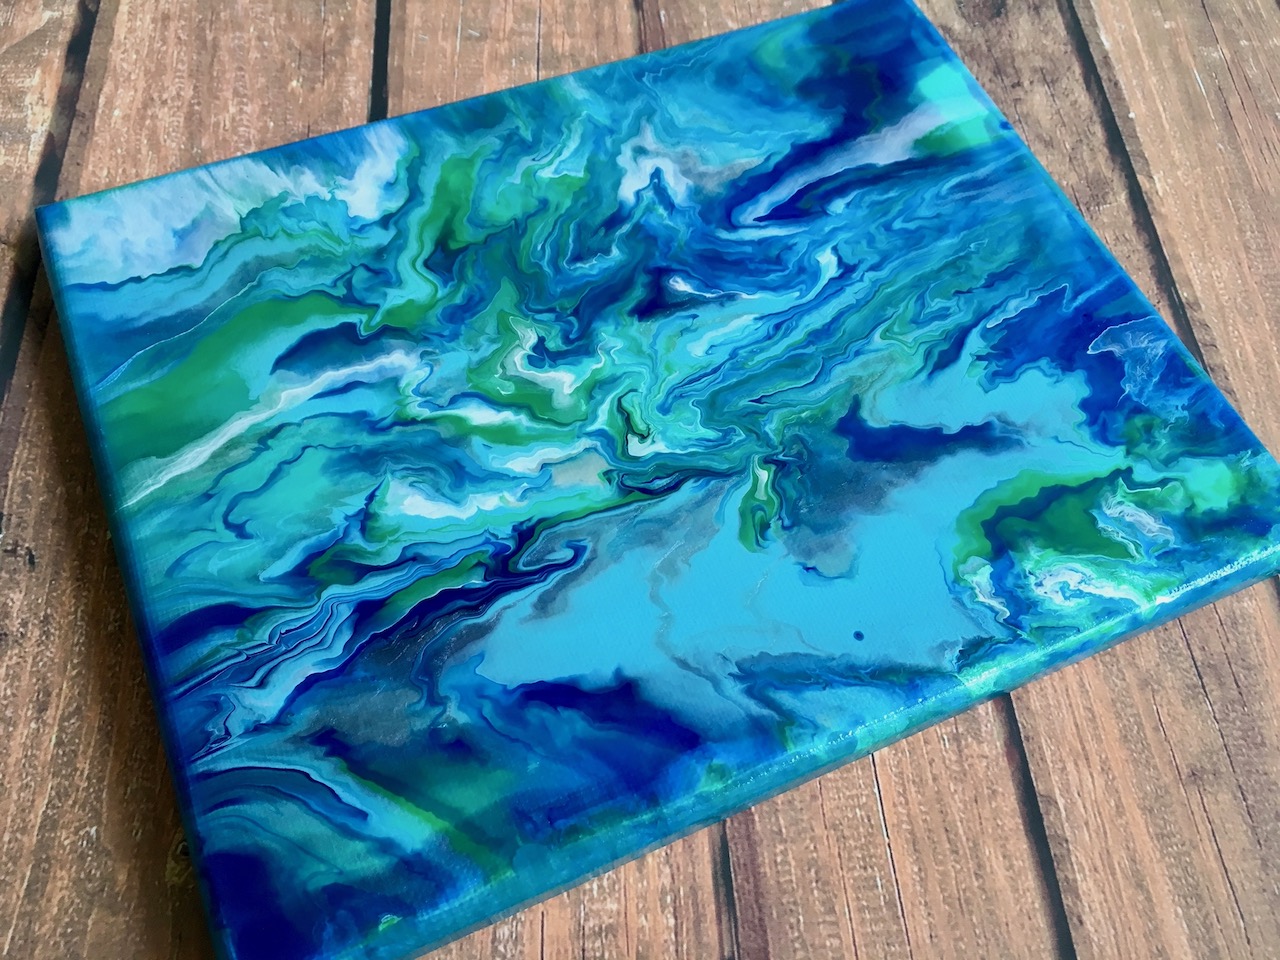 Learn Acrylic Pour Painting at Home by Carrie Kelley